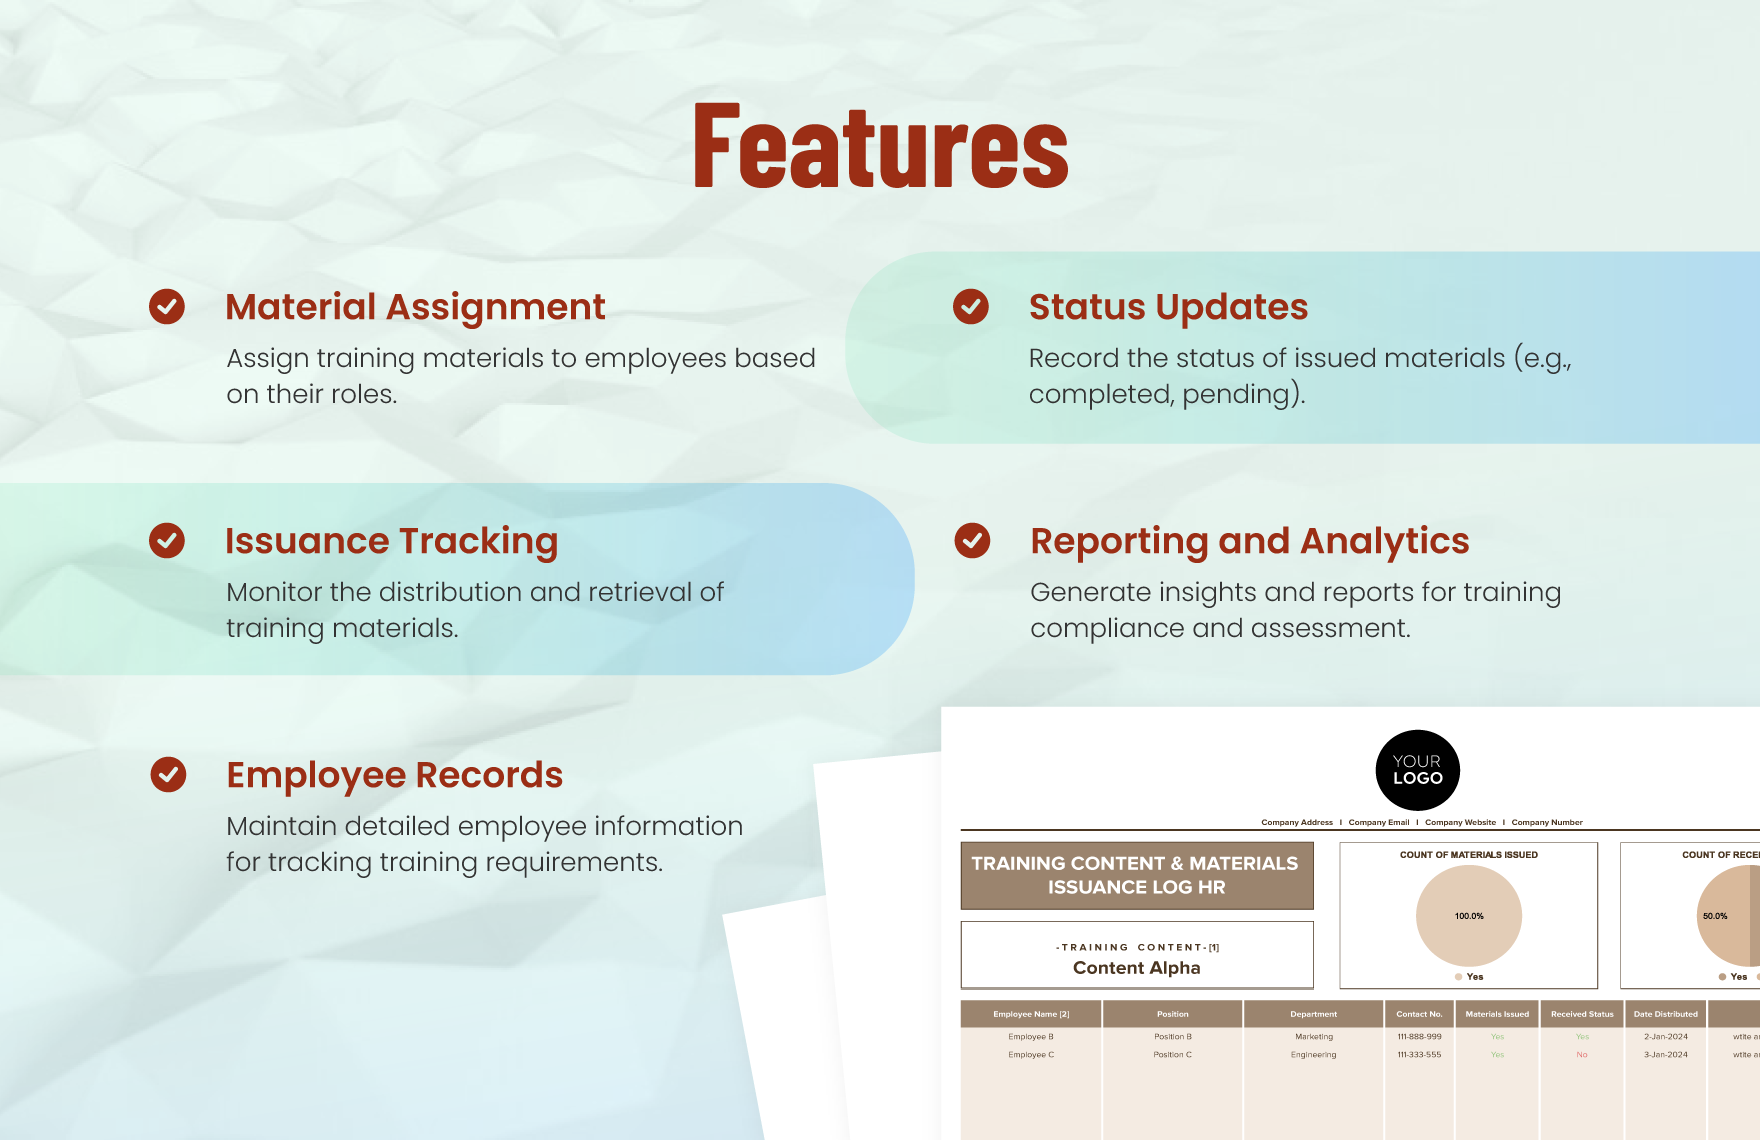 Training Content & Materials Issuance Log HR Template